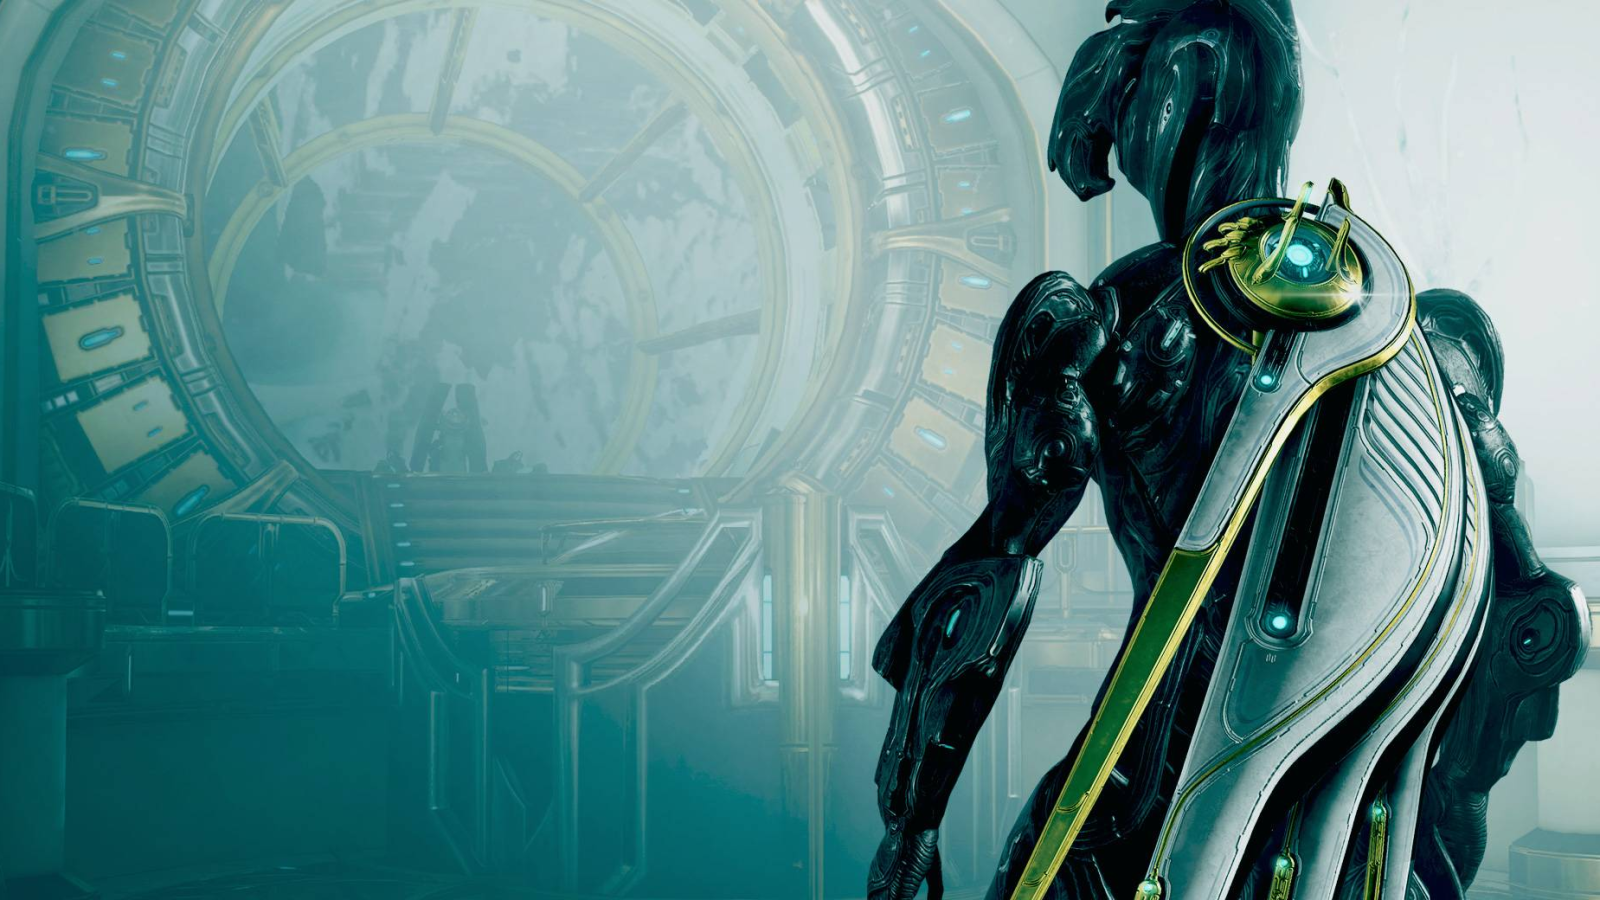 Get a free Syandana from Prime Gaming